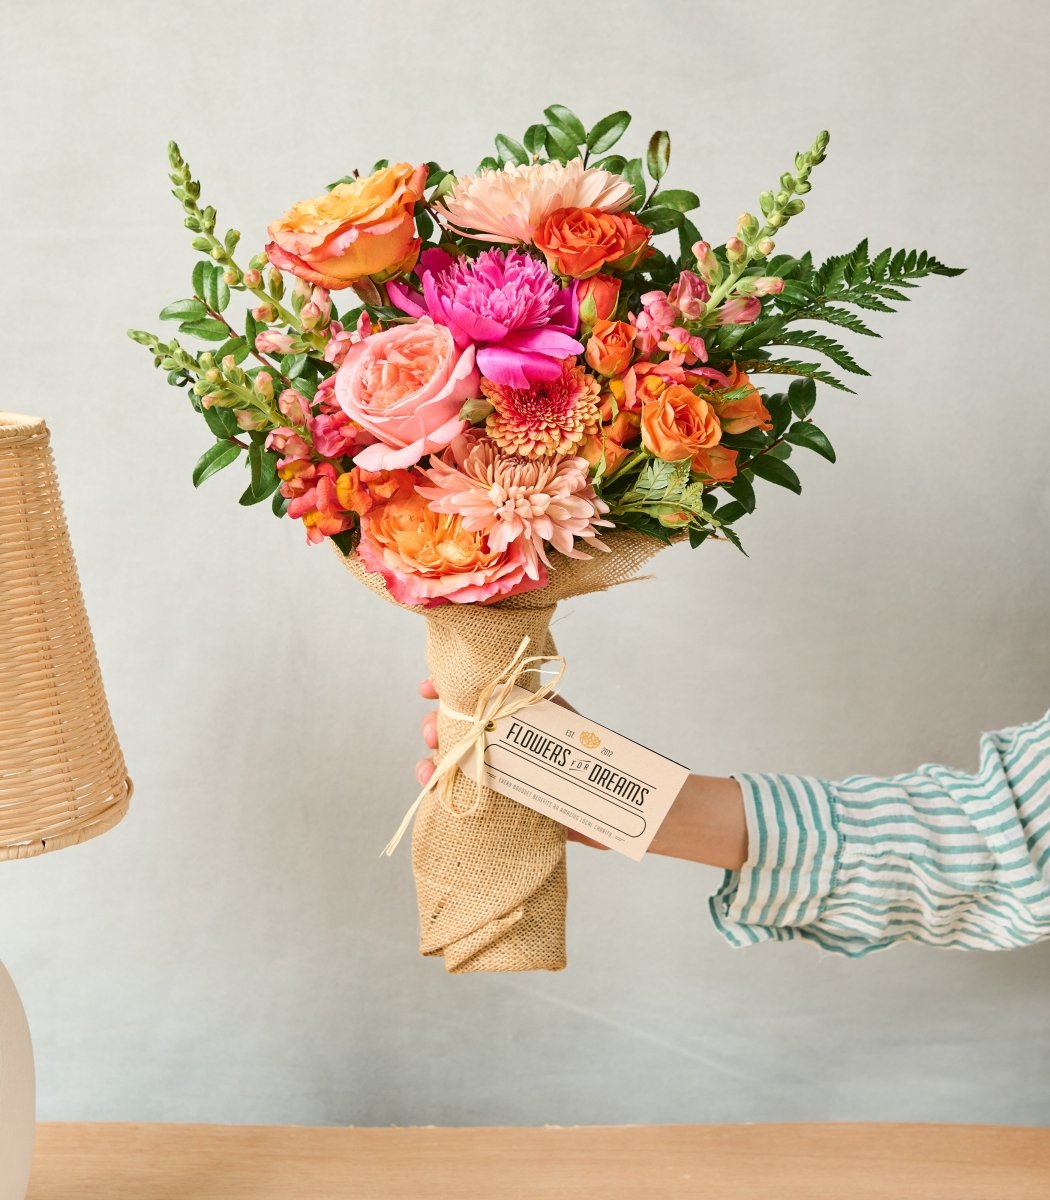 Flower Delivery In Chicago, Milwaukee & Detroit | Flowers For Dreams